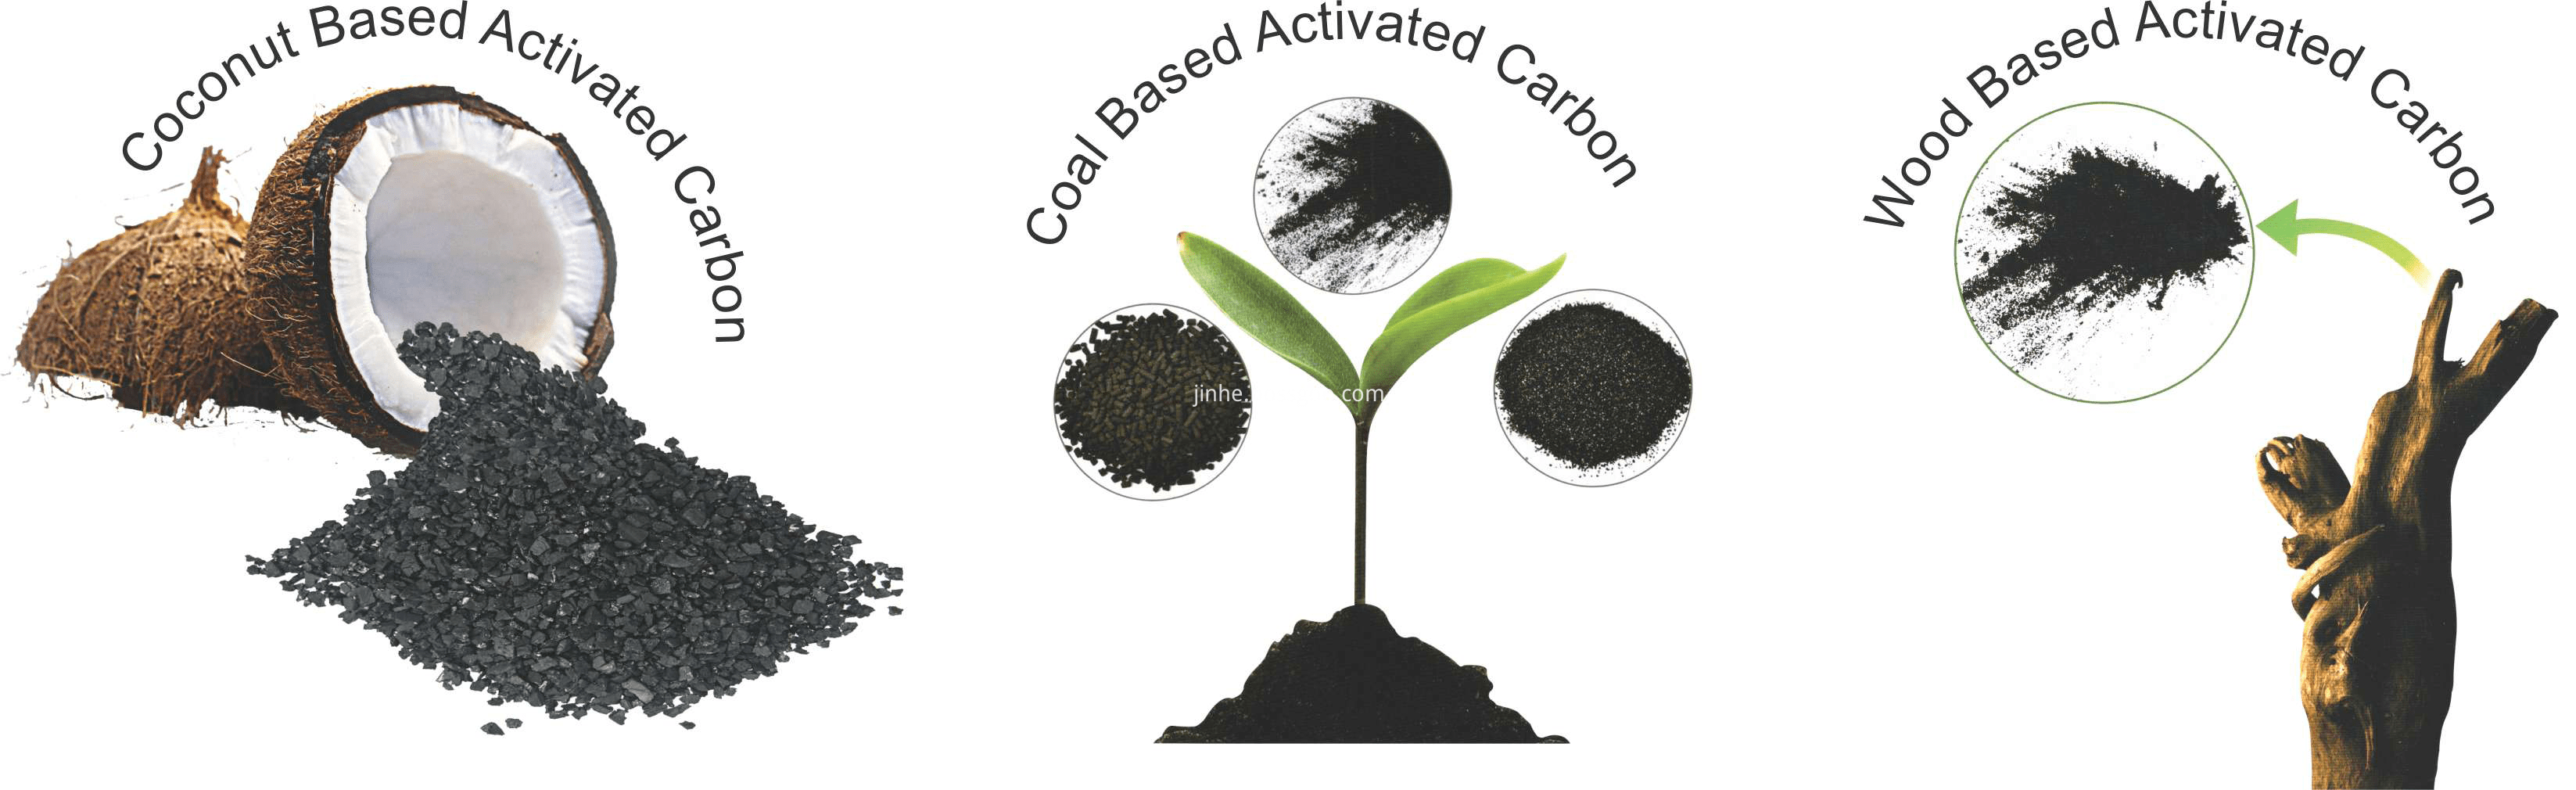 Hardness Coconut Shell Activated Carbon For Gold Mining